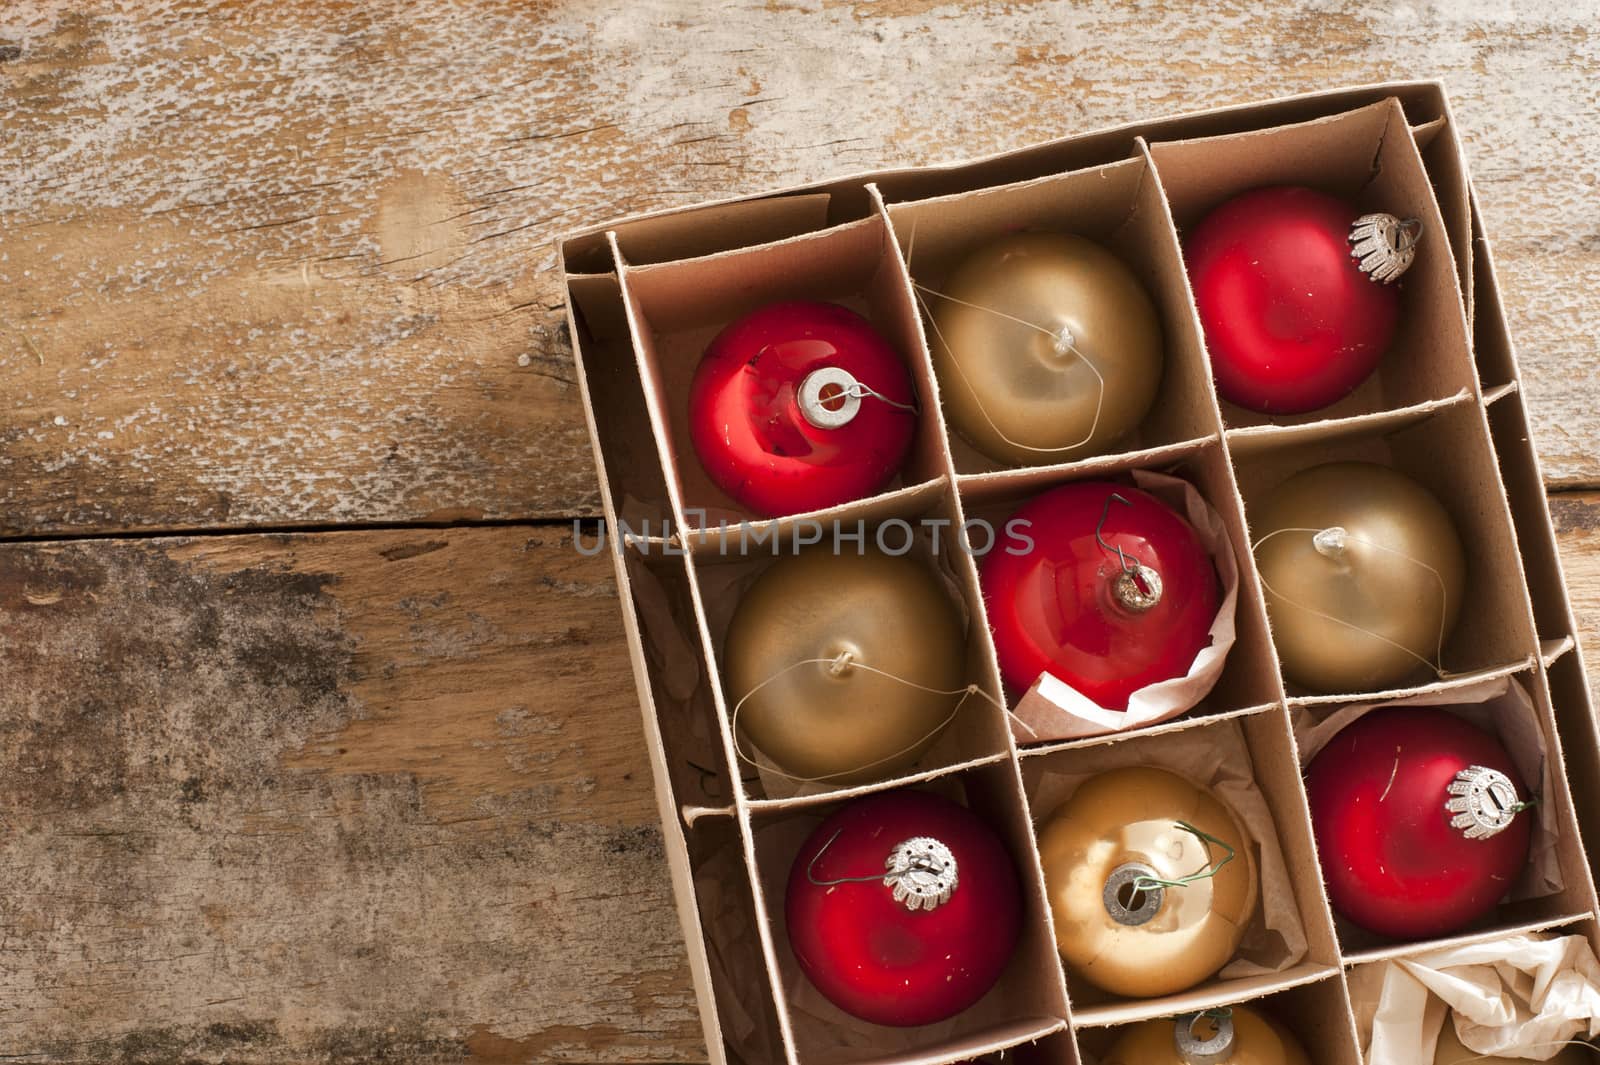 Shiny red and gold holiday ornaments in box on rustic table as seen from an overhead view